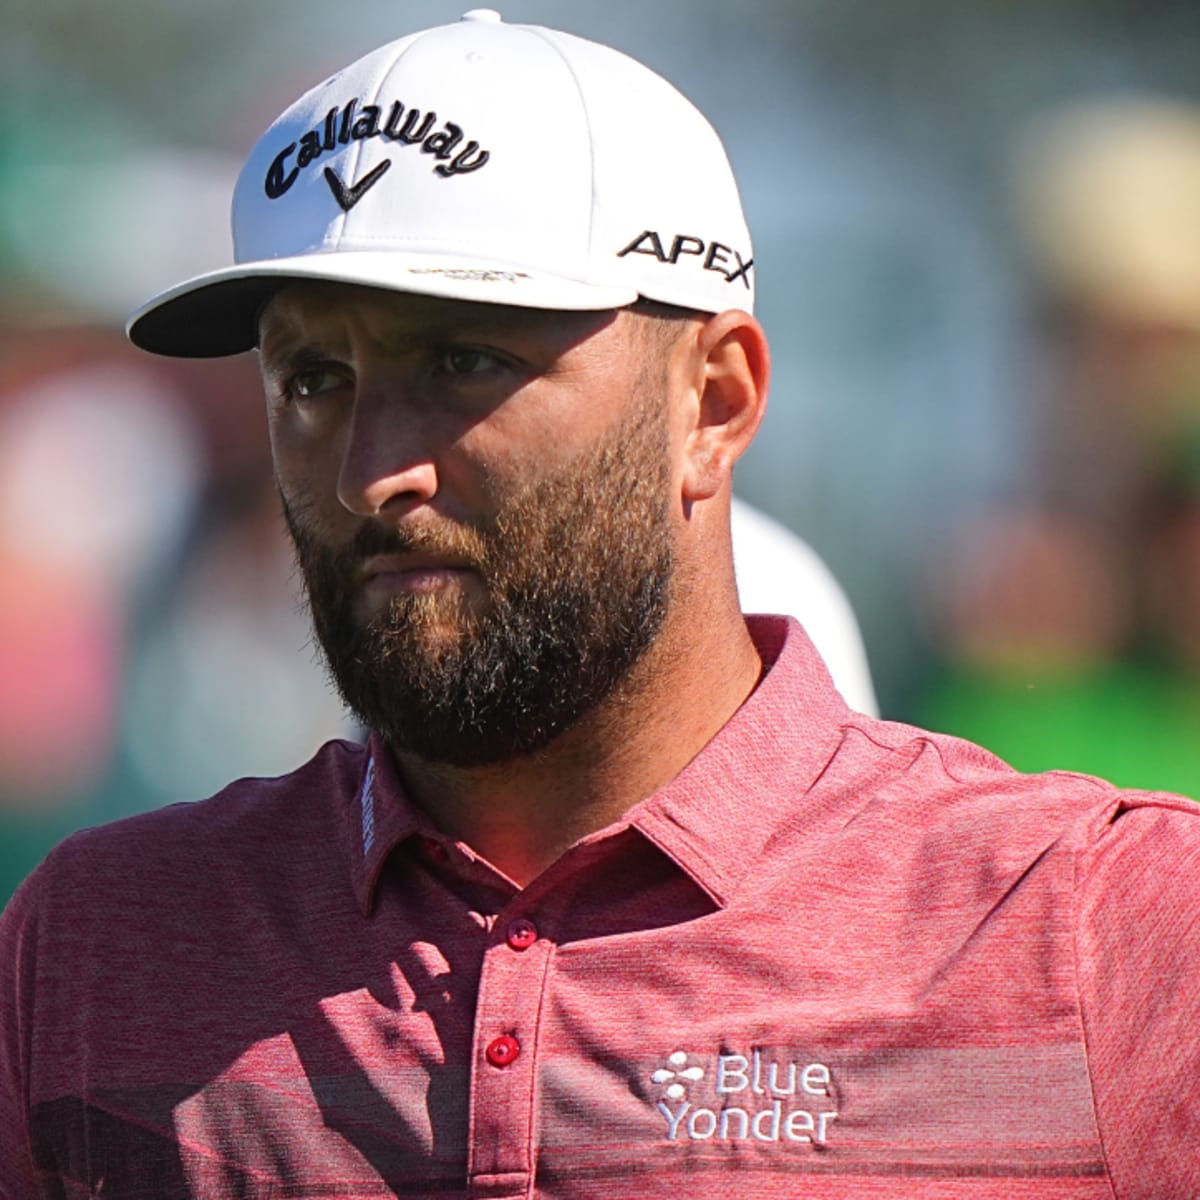 2023 Masters prize money, purse: Payouts, winnings for Jon Rahm, each  golfer from record $18 million pool 